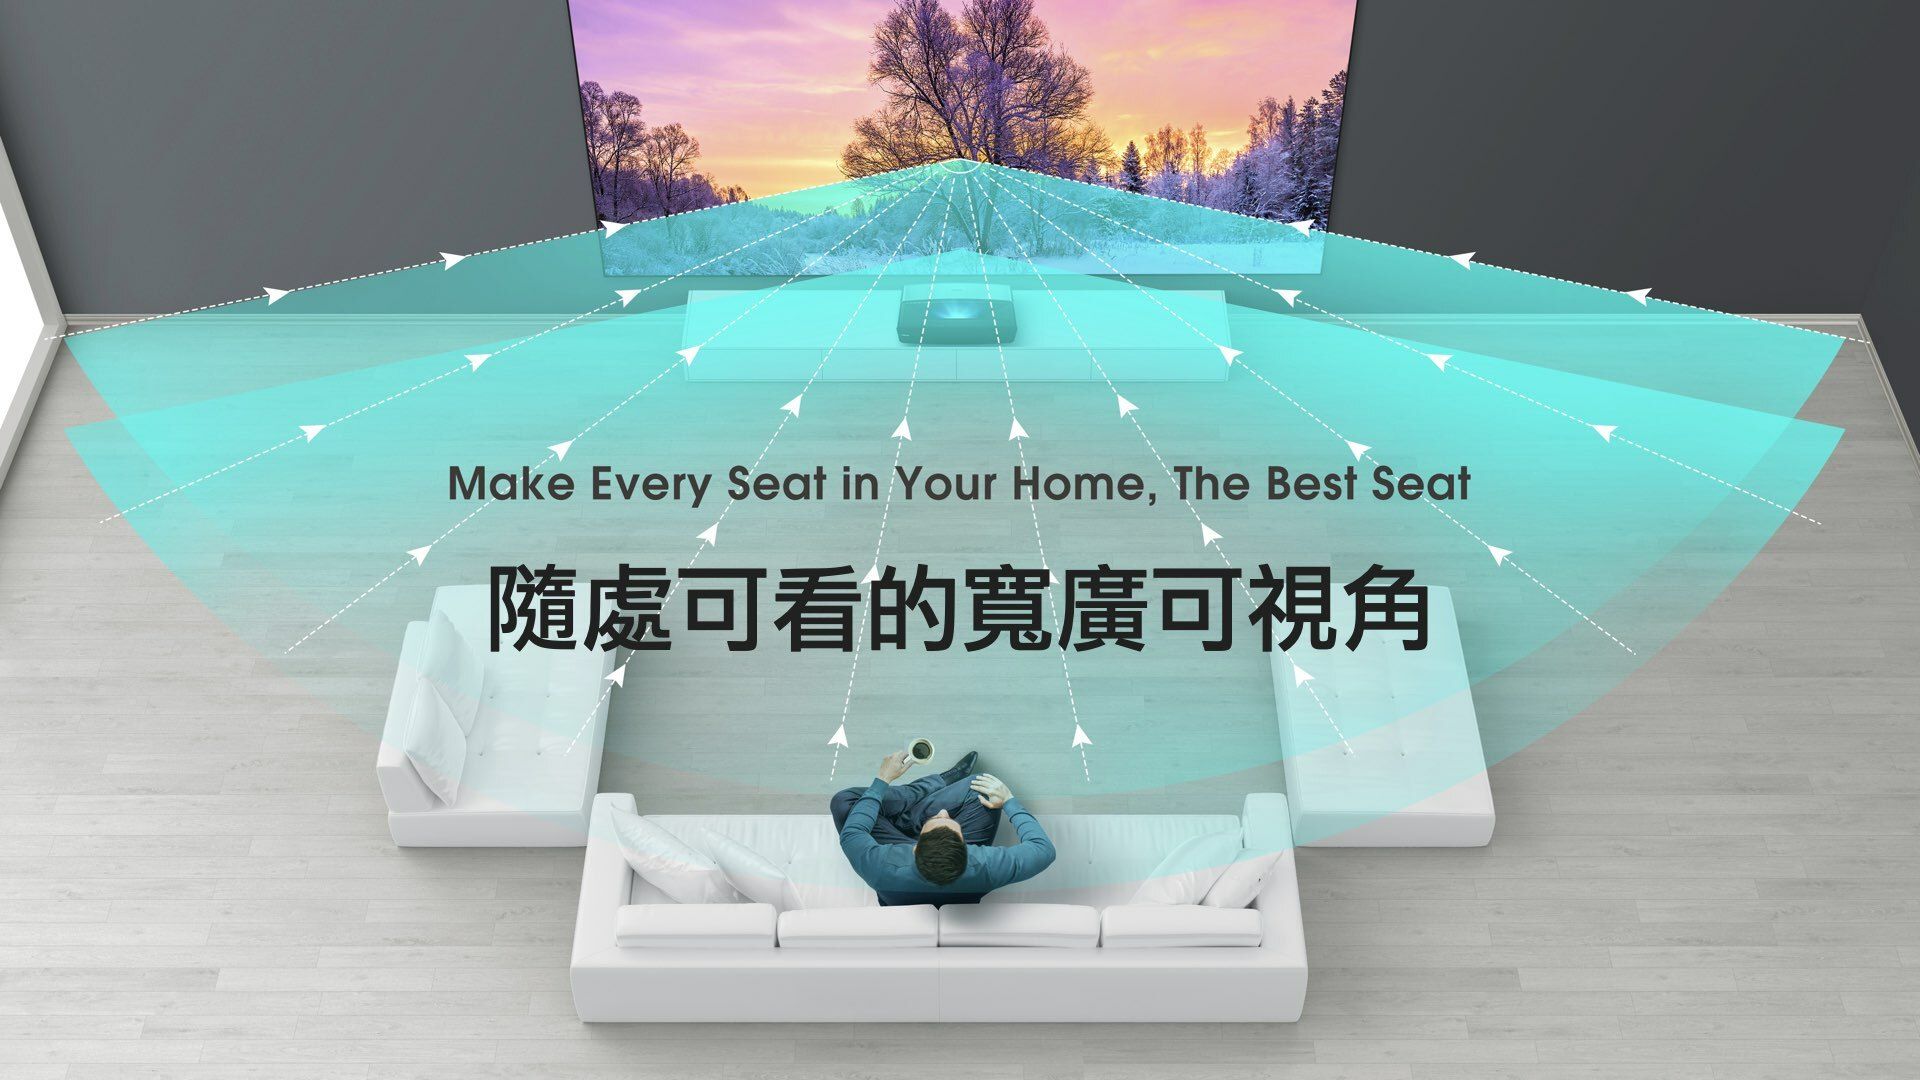 Make Every Seat in Your Home, The Best Seat隨處可看的寬廣可視角